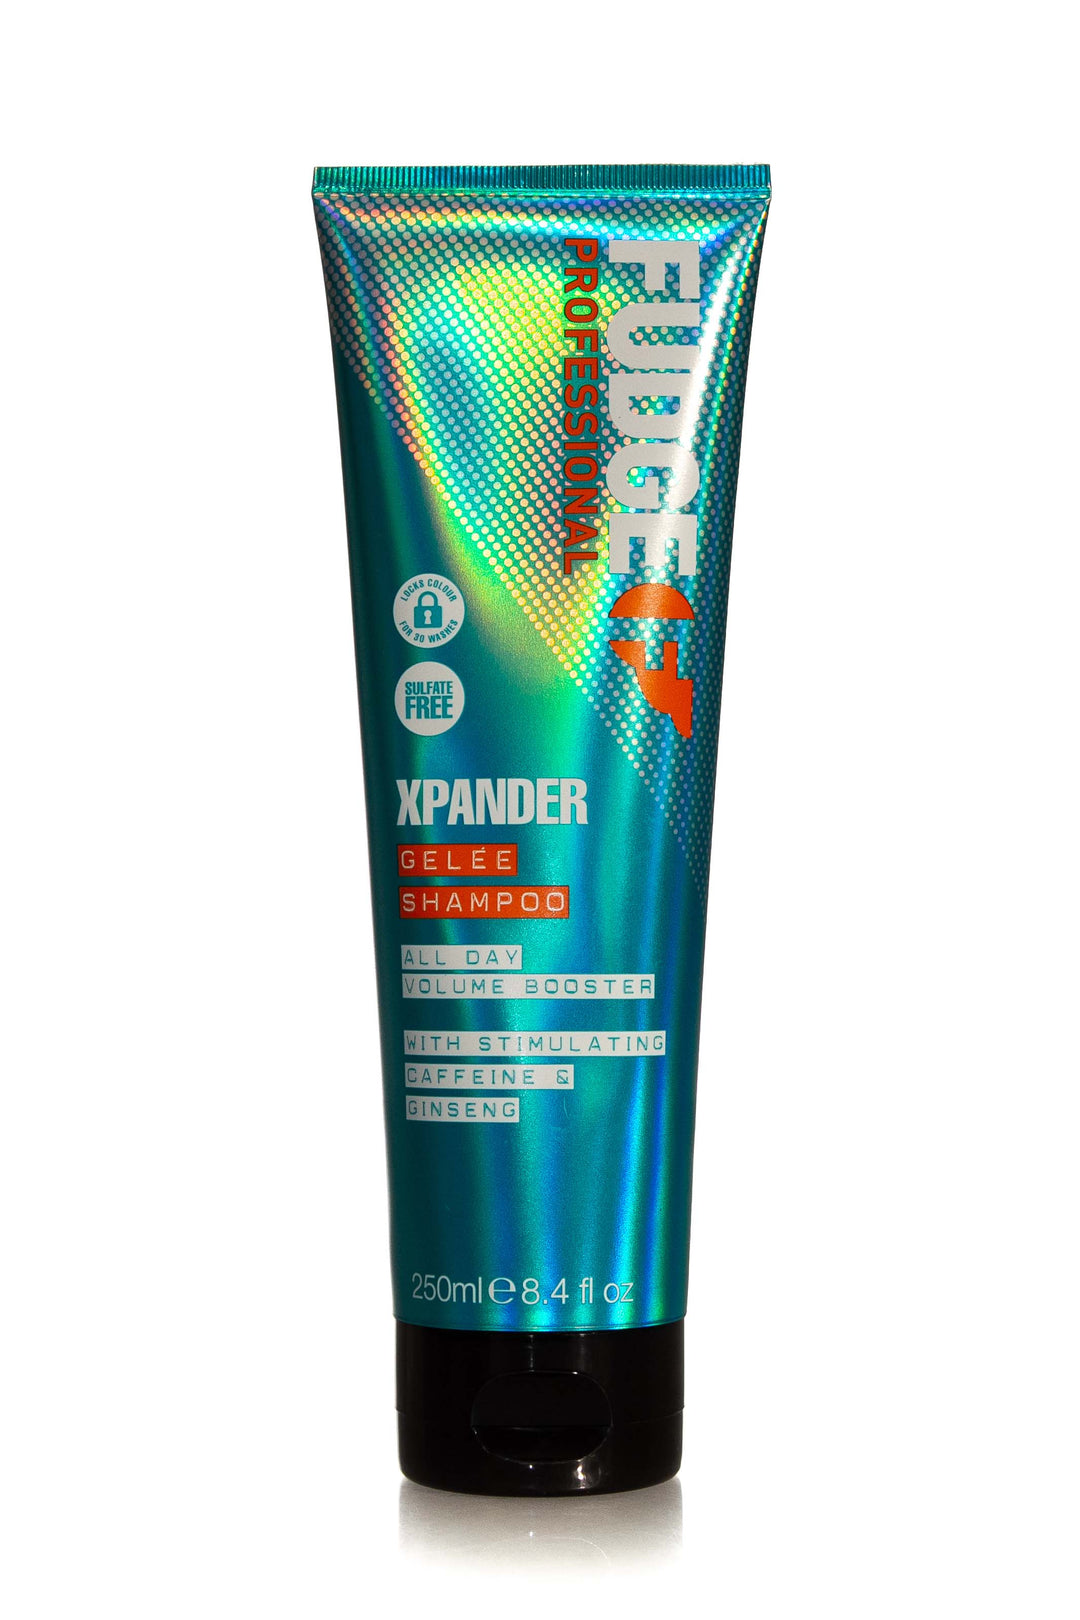 FUDGE PROFESSIONAL XPANDER GELEE ALL DAY VOLUME BOOSTER SHAMPOO 250ML